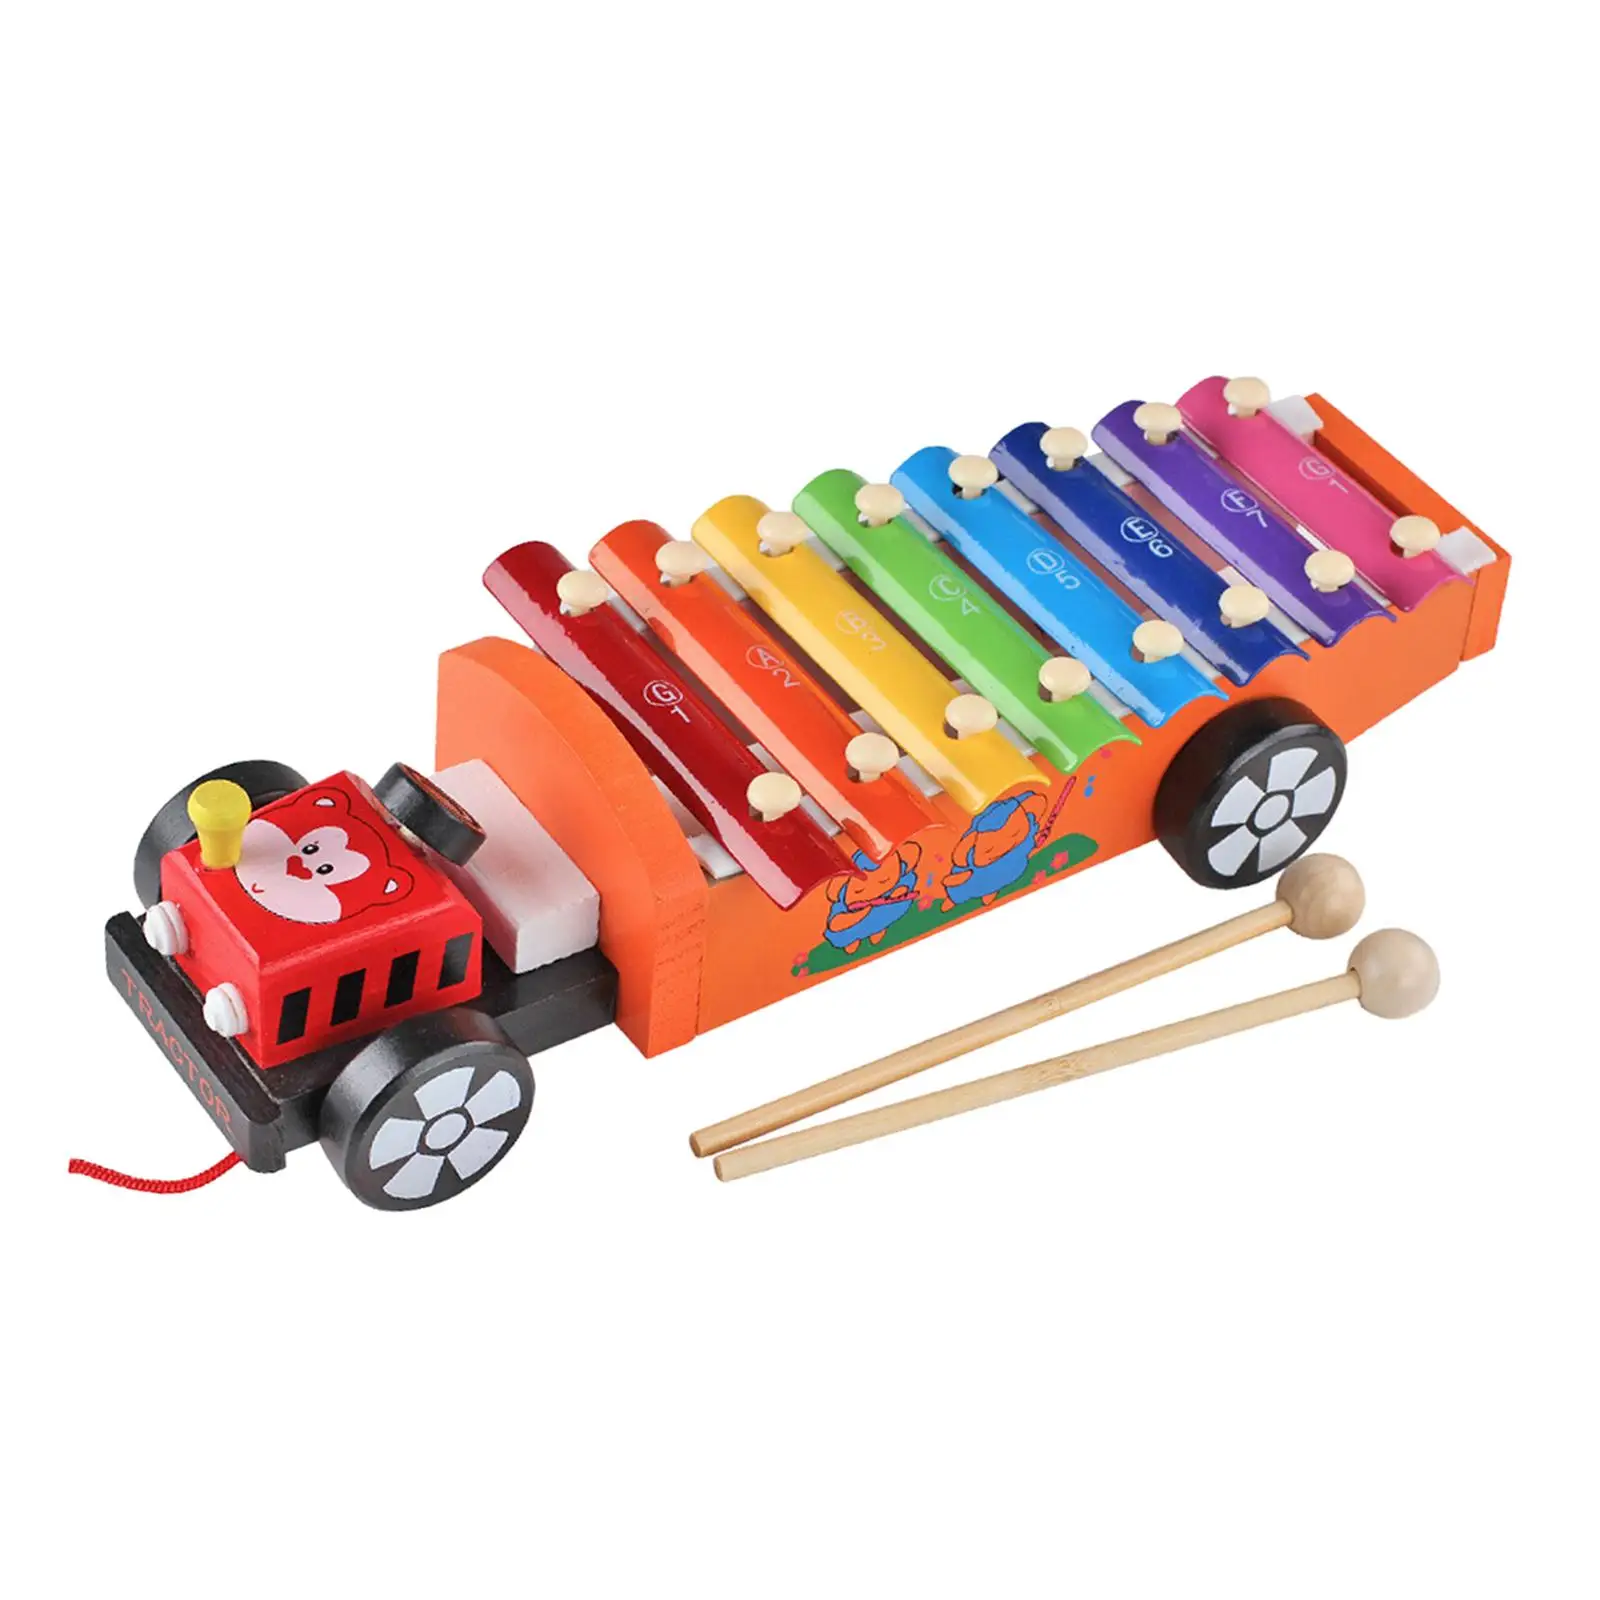 8 Note Xylophone with 2 Mallets Educational Hand Percussion Musical Instrument Valentines Day Gifts for Kids Adults Beginners